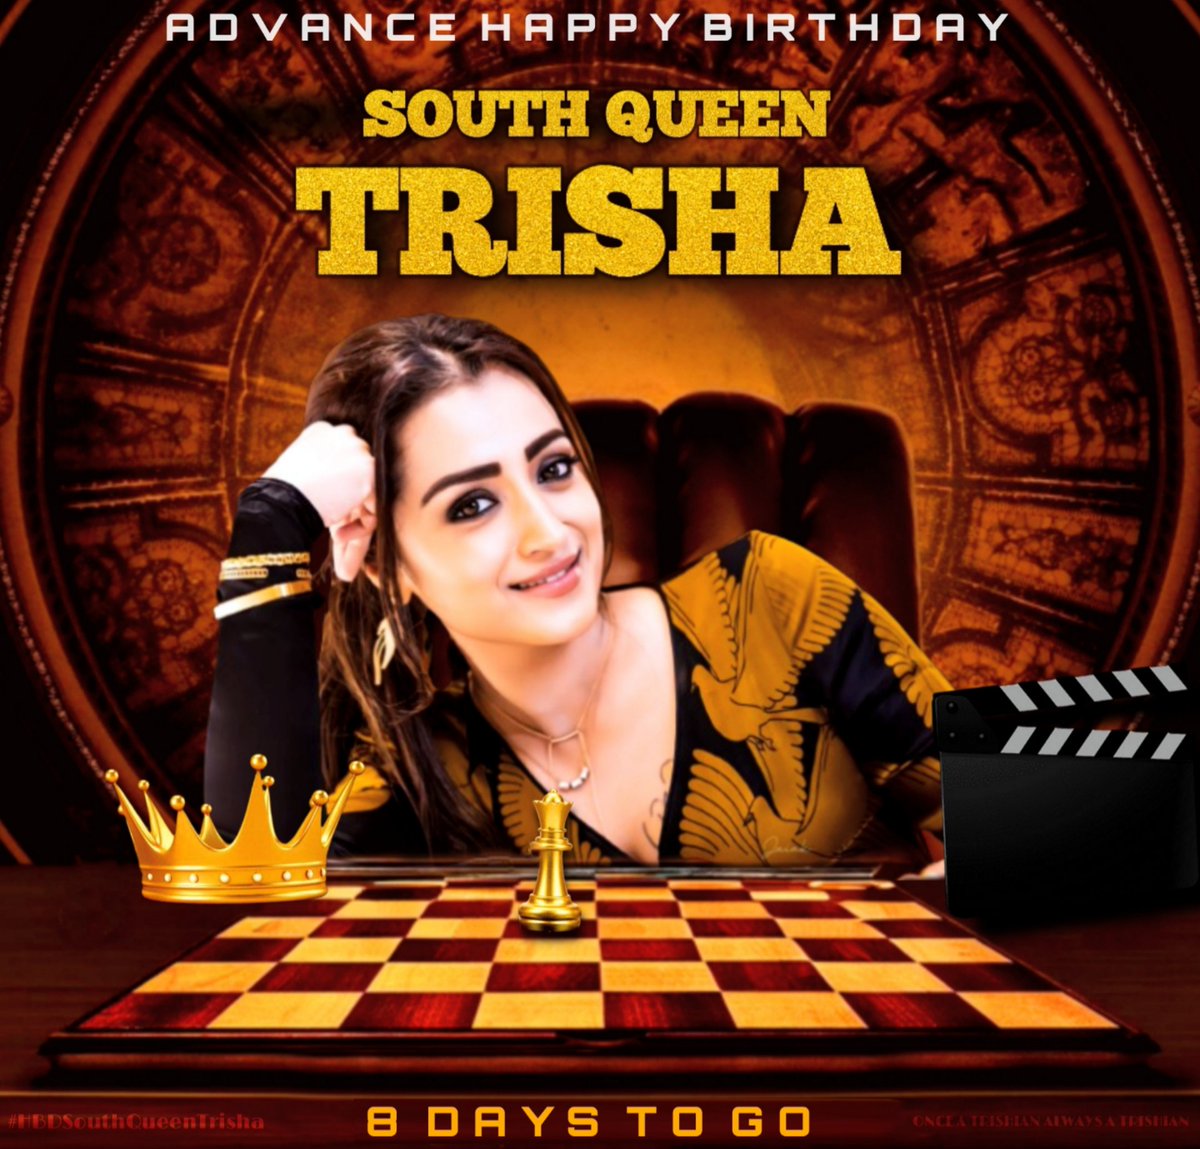 8 DAYS TO GO for South Queen Birthday Blast 😎💥 #AdvanceHBDSouthQueenTrisha #SouthQueenTrisha #Trisha @trishtrashers